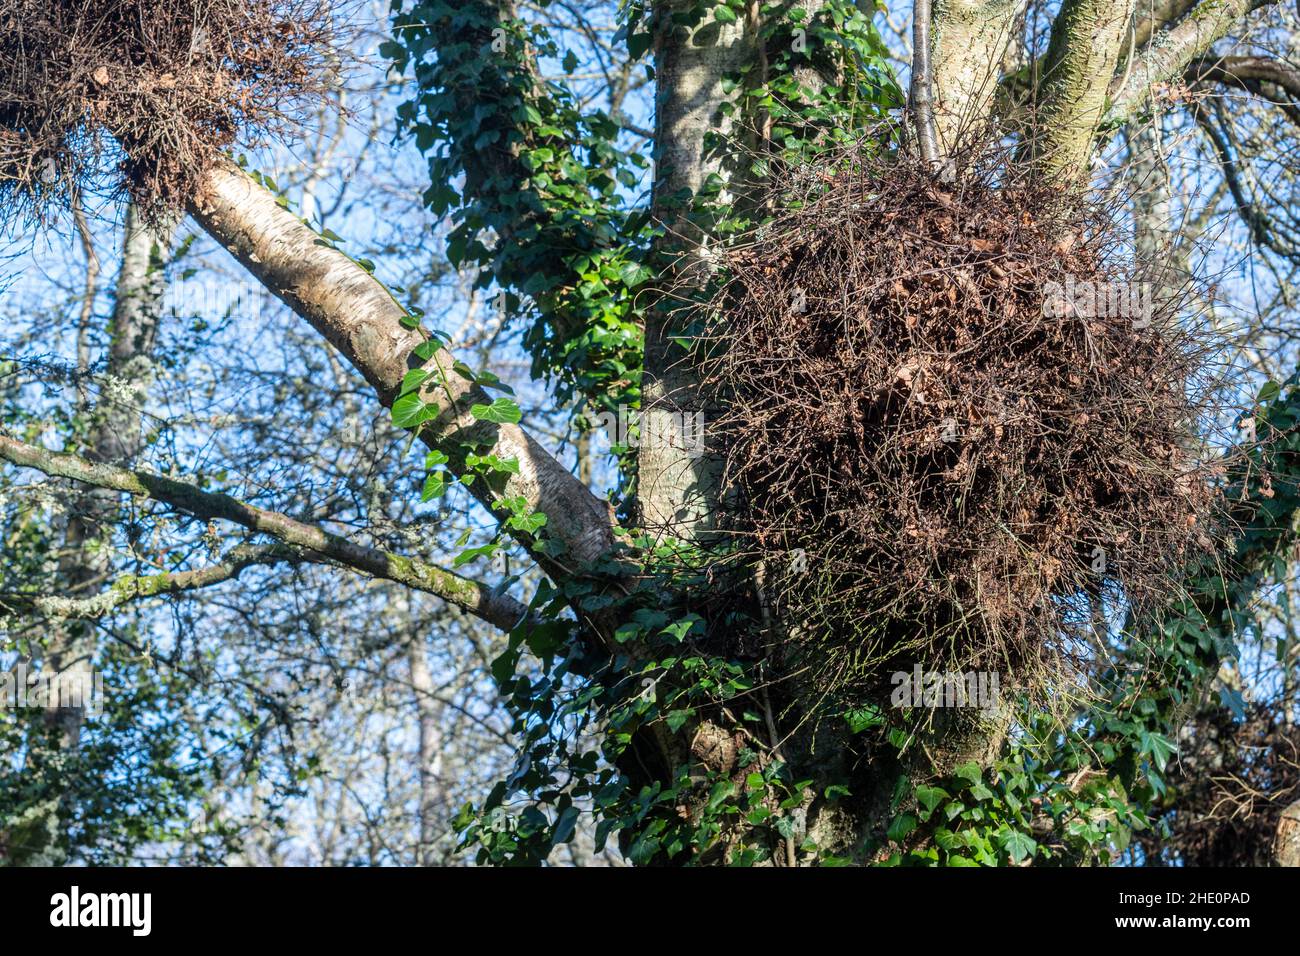 Witches broom gall growing on a birch tree (Betula species), UK, during winter Stock Photo